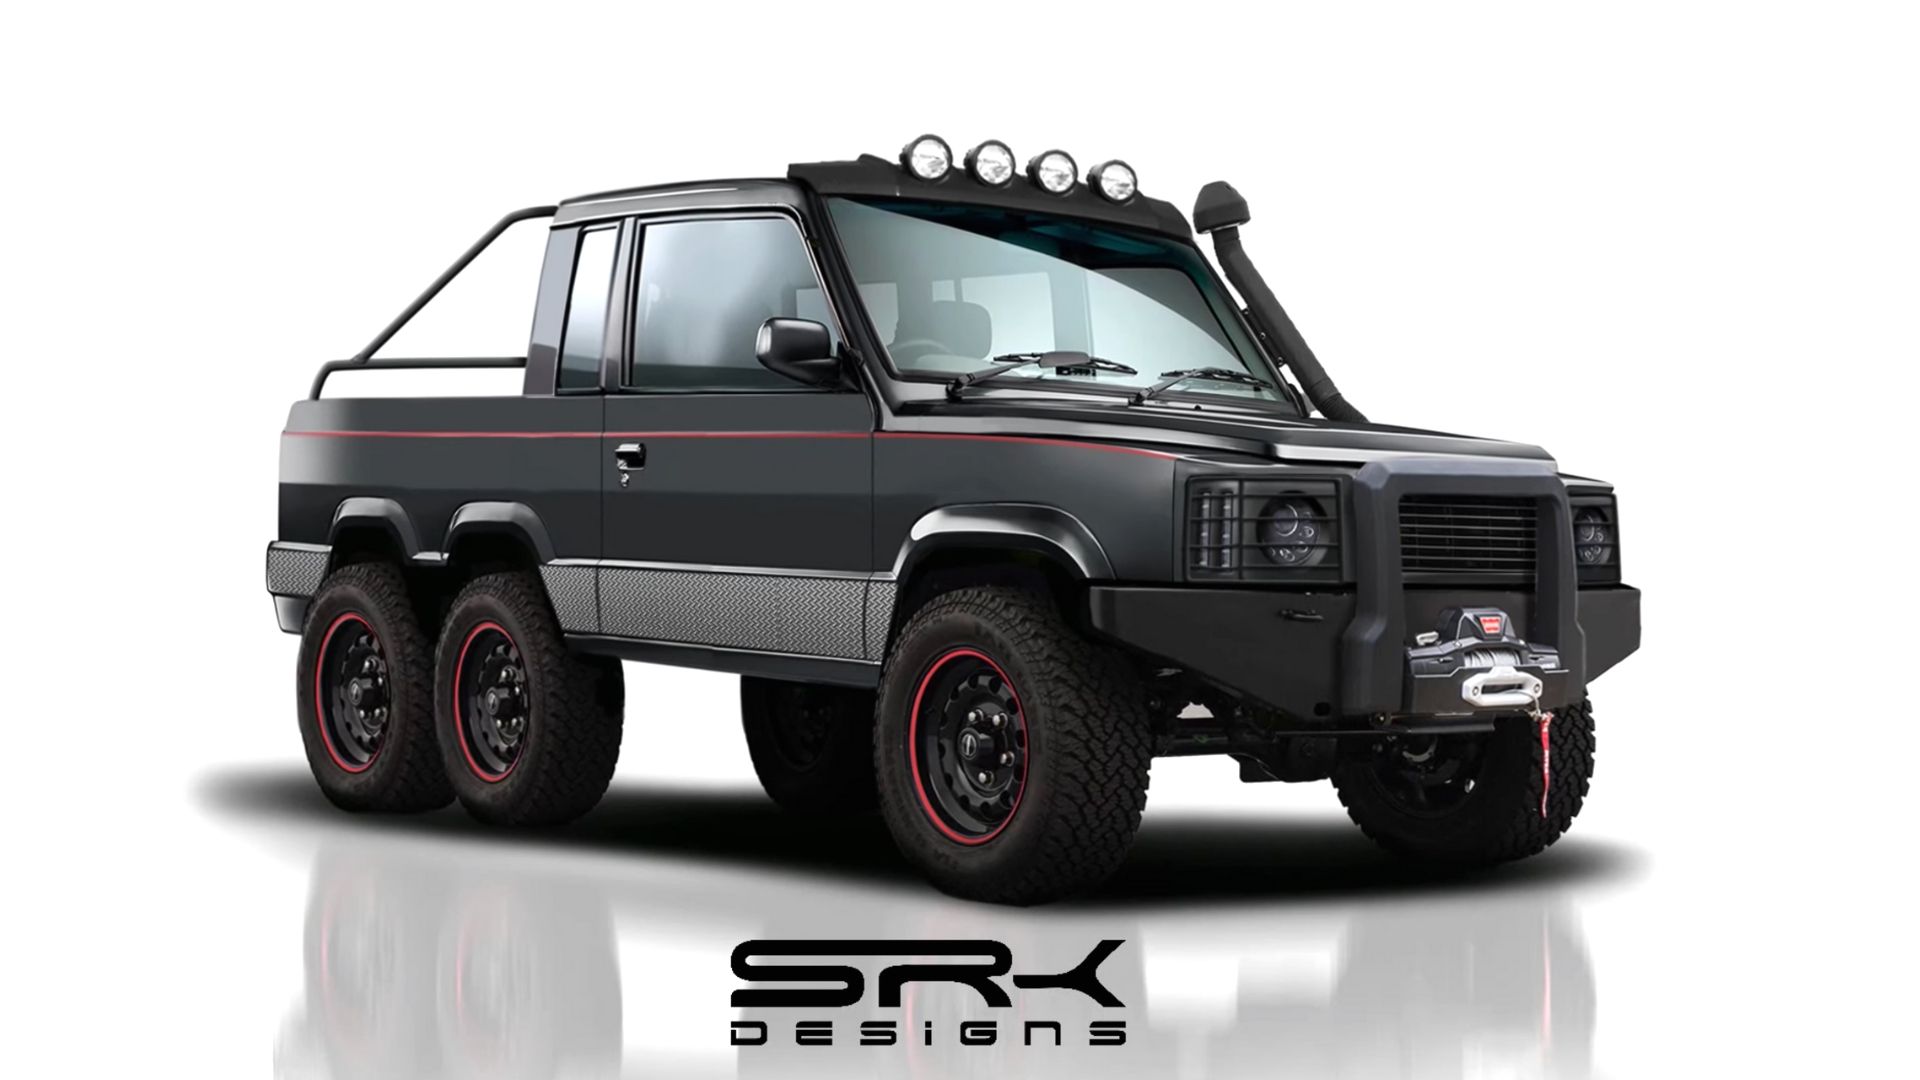 Tata Sumo 6x6 Rendering Brings Utility And Off Roading To The Fore